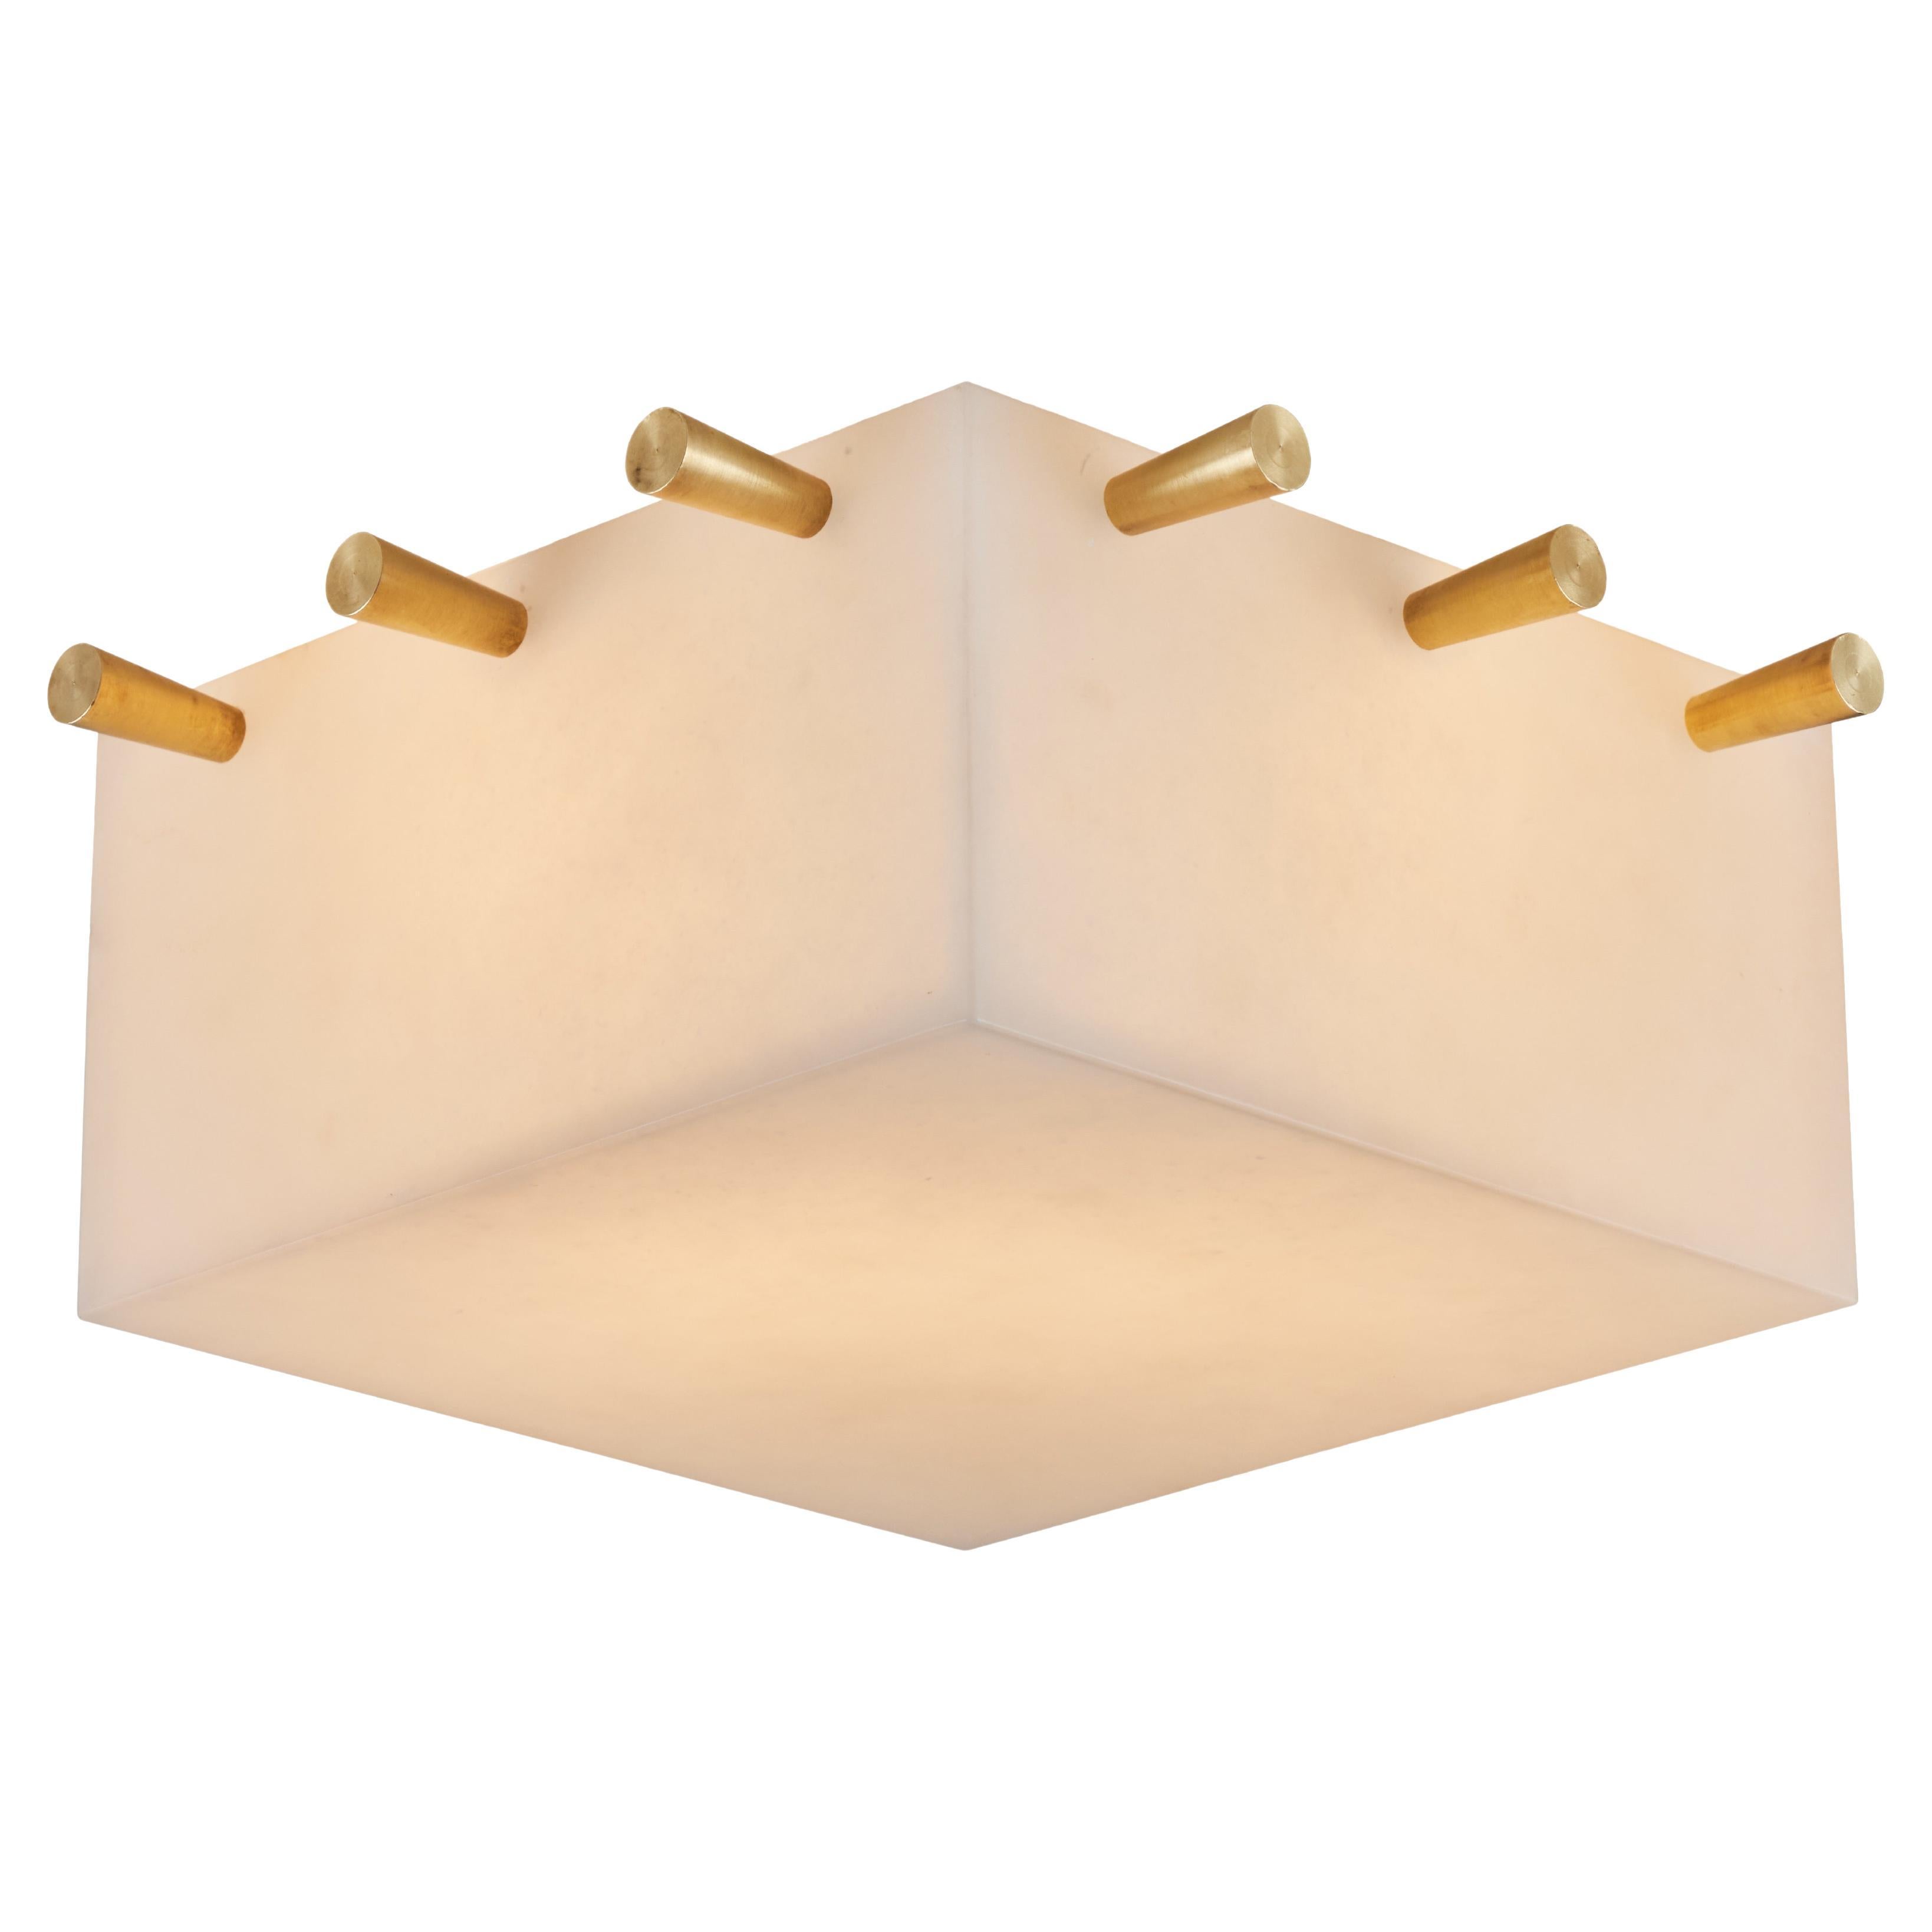 'Chapo' Alabaster and Brass Wall or Ceiling Lamp by Denis De La Mesiere For Sale